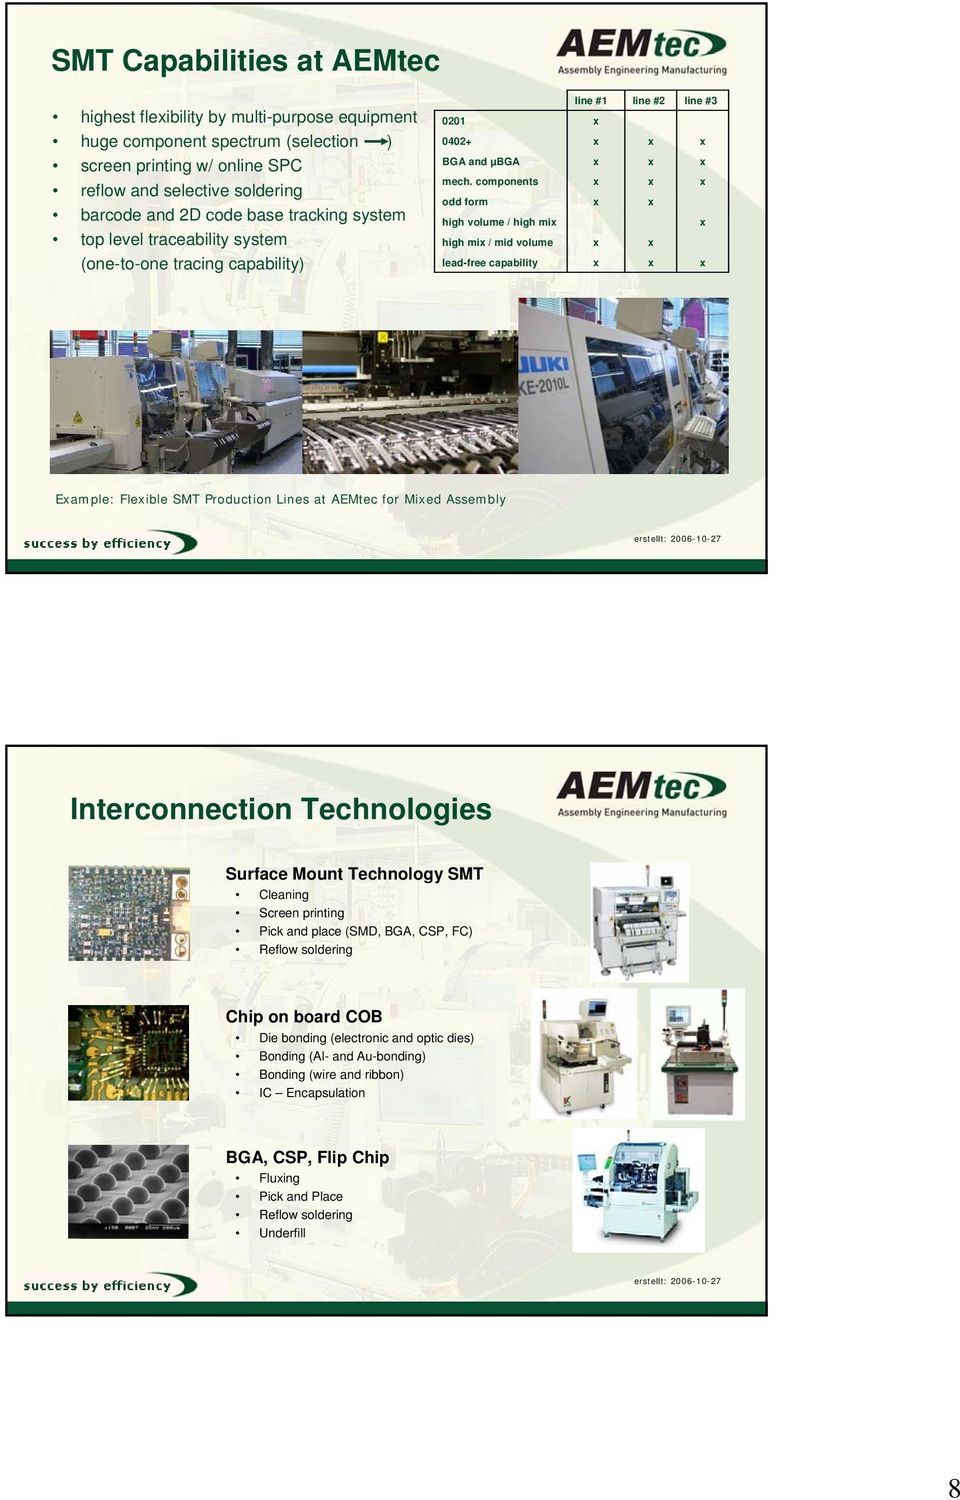 components odd form high volume / high mi high mi / mid volume lead-free capability line #1 line #2 line #3 Eample: Fleible SMT Production Lines at AEMtec for Mied Assembly Interconnection